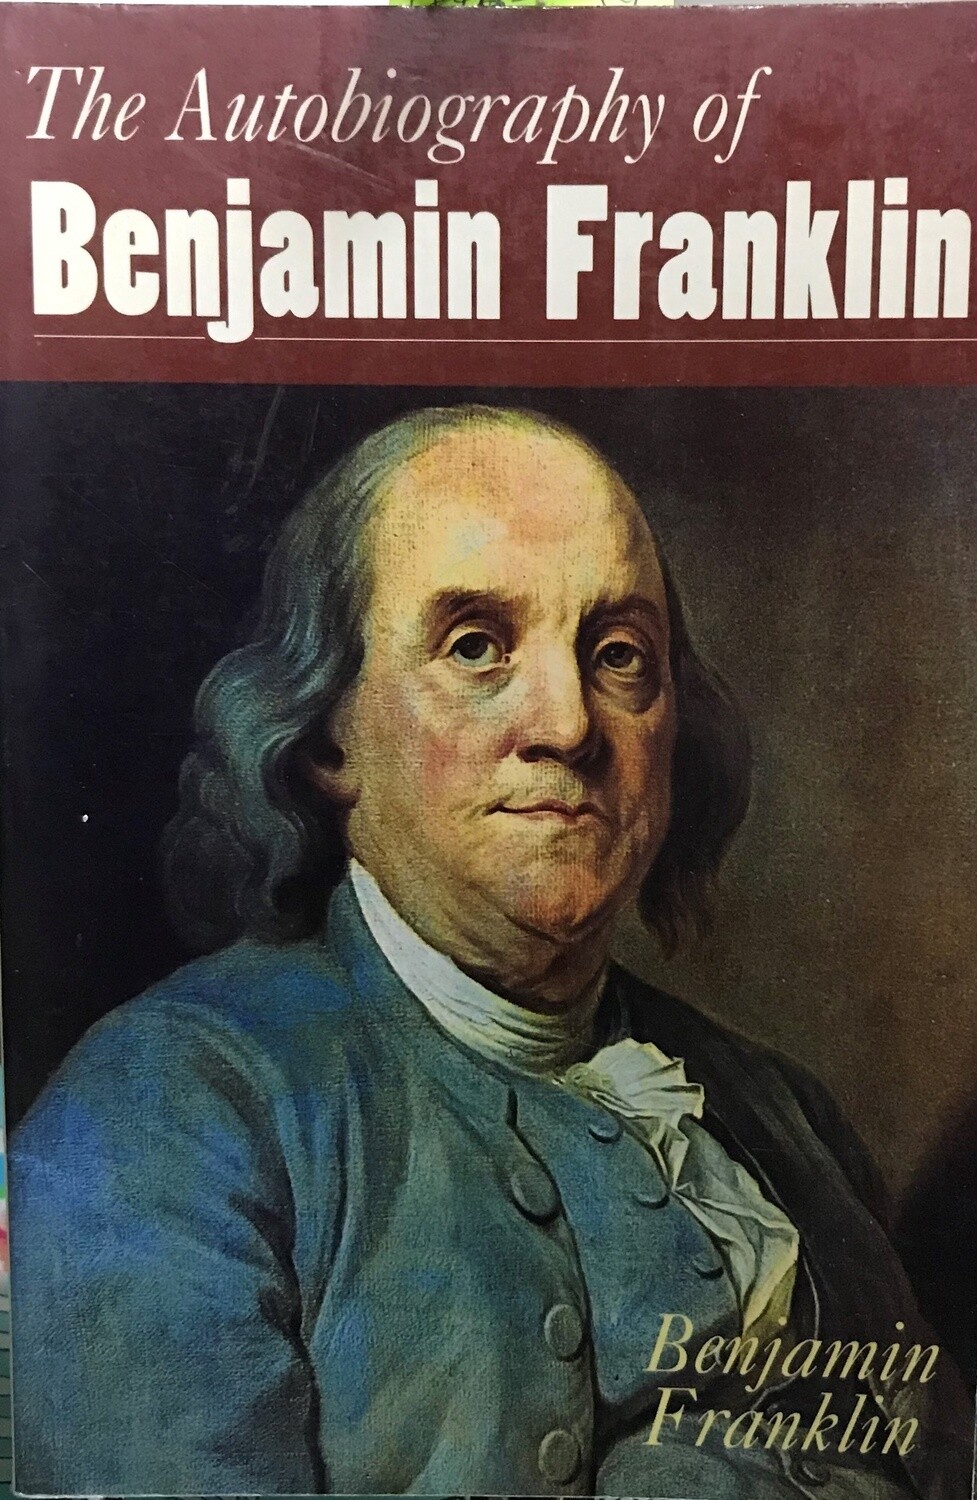 USED THE AUTOBIOGRAPHY OF BENJAMIN FRANKLIN 1